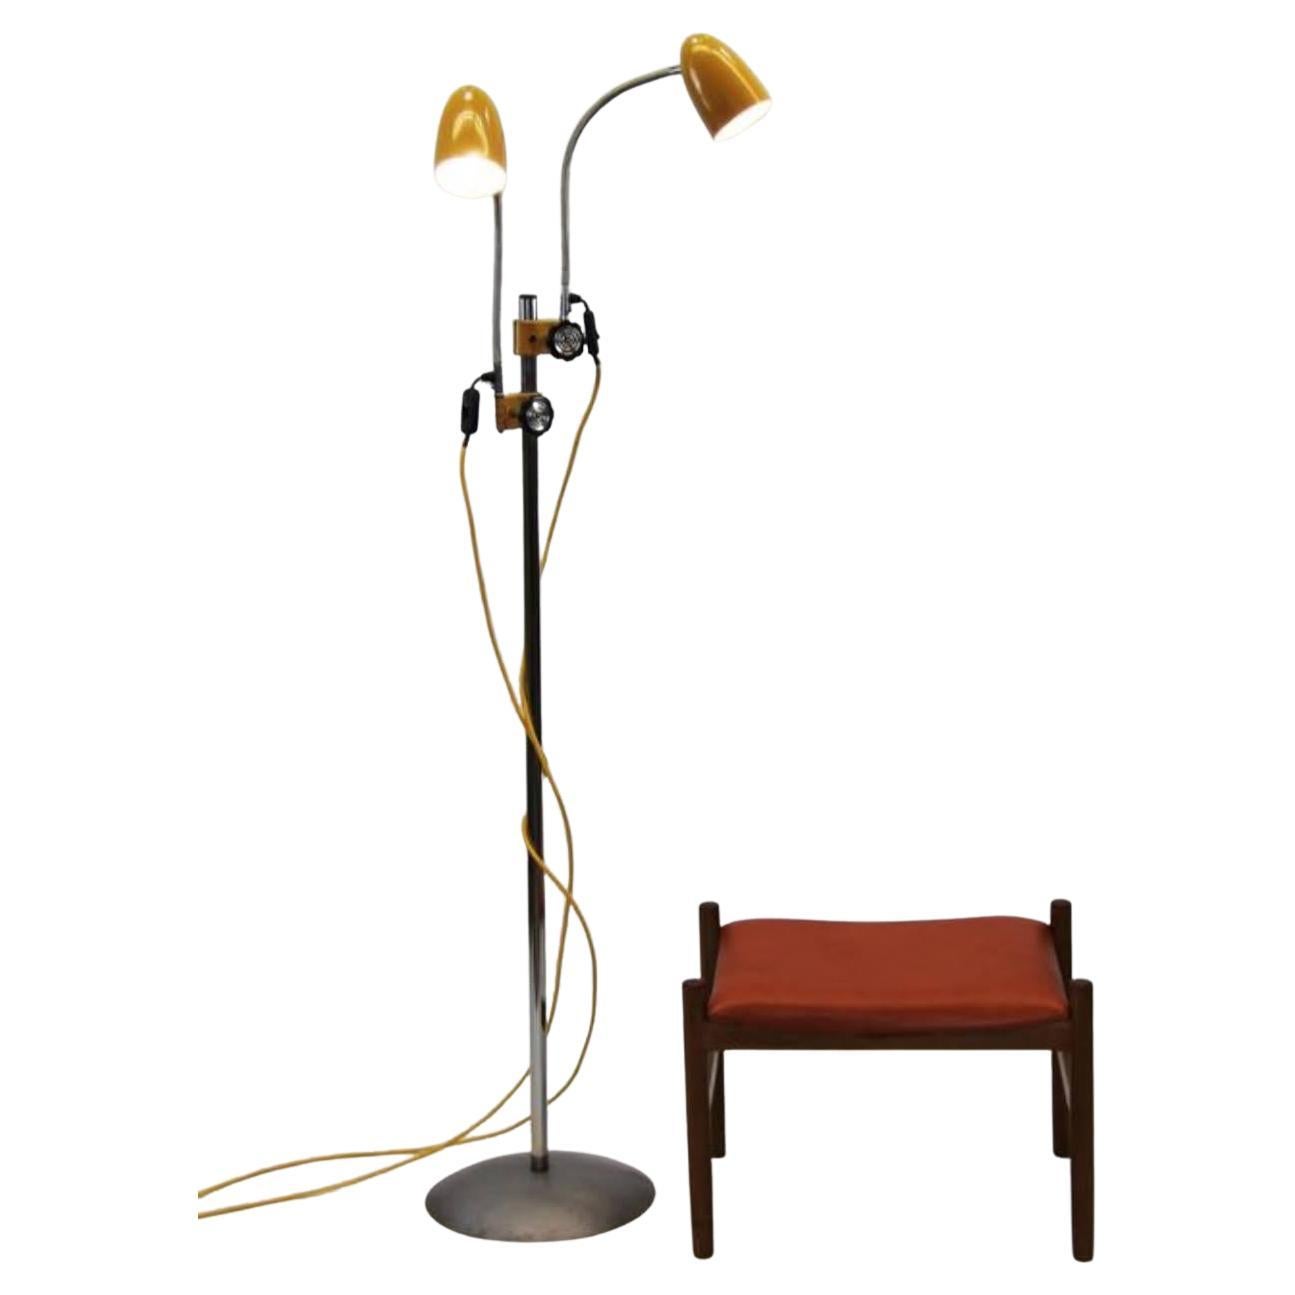 Vintage Mid-Century Floor Lamp with Two "Gooseneck" Lamps from the 50s/60s For Sale